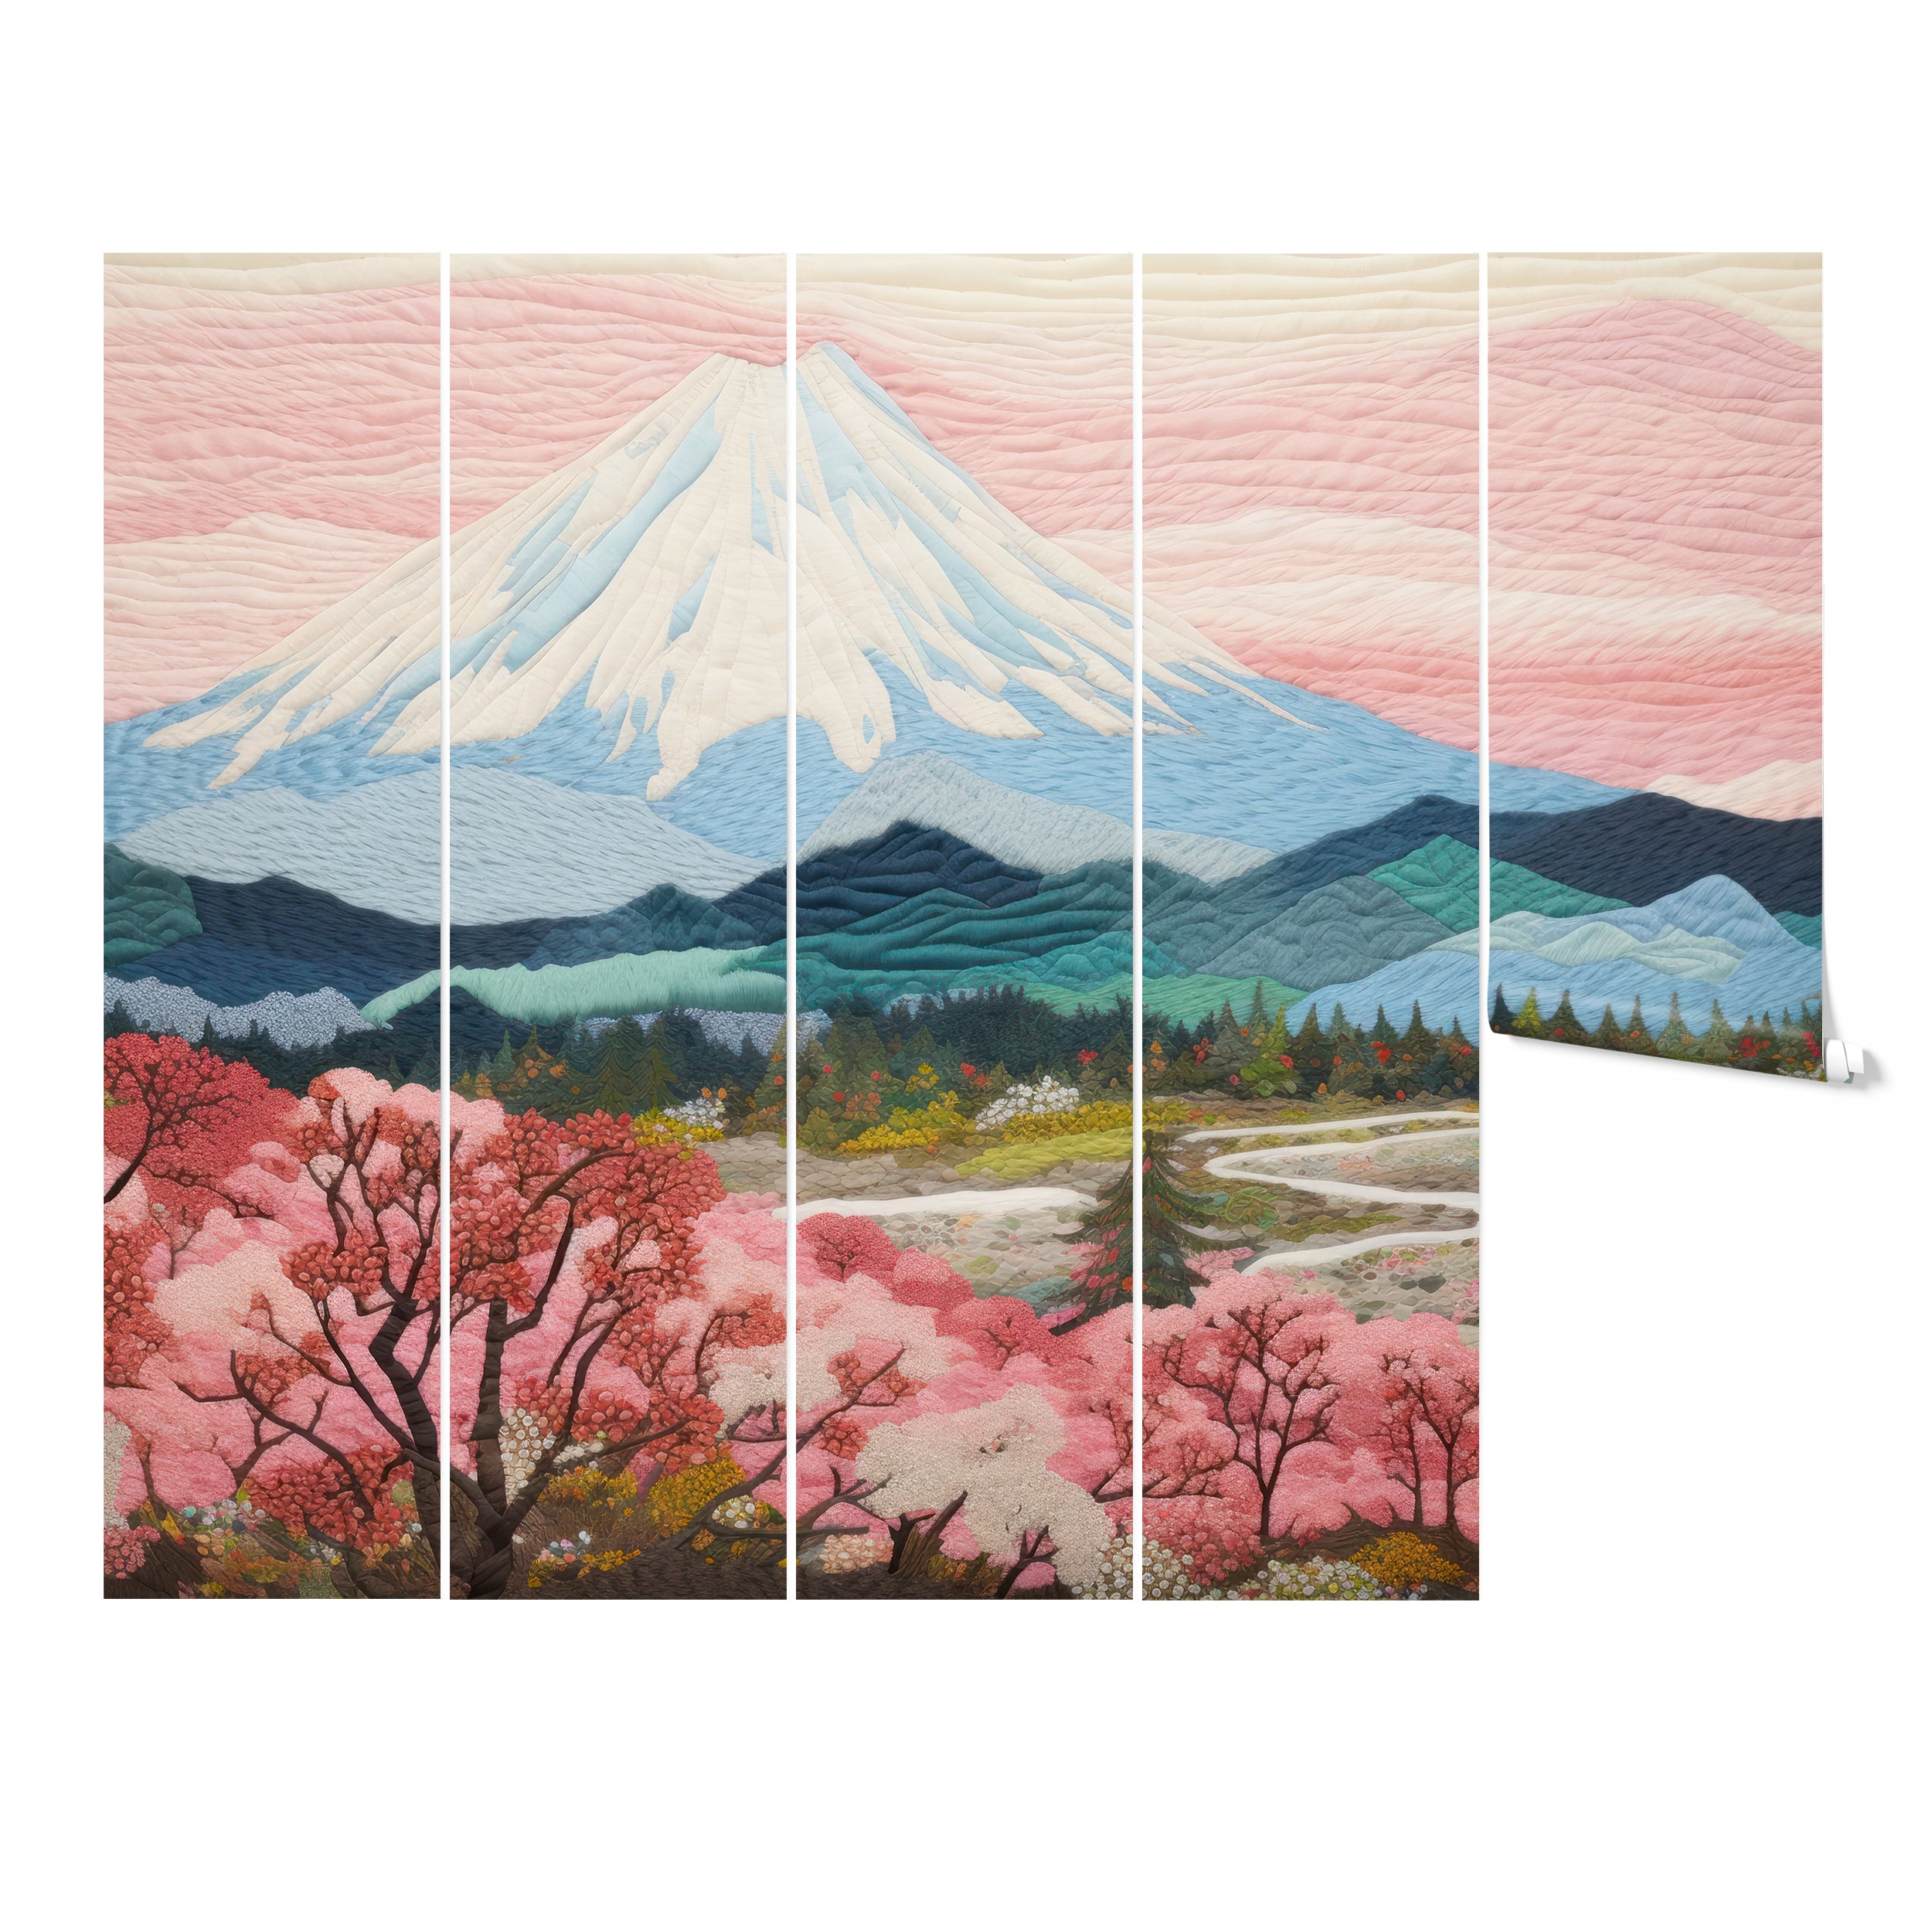 Spring Fuji Mural wallpaper displayed in five panels, showcasing the snow-capped Mount Fuji, cherry blossoms, and a meandering river.